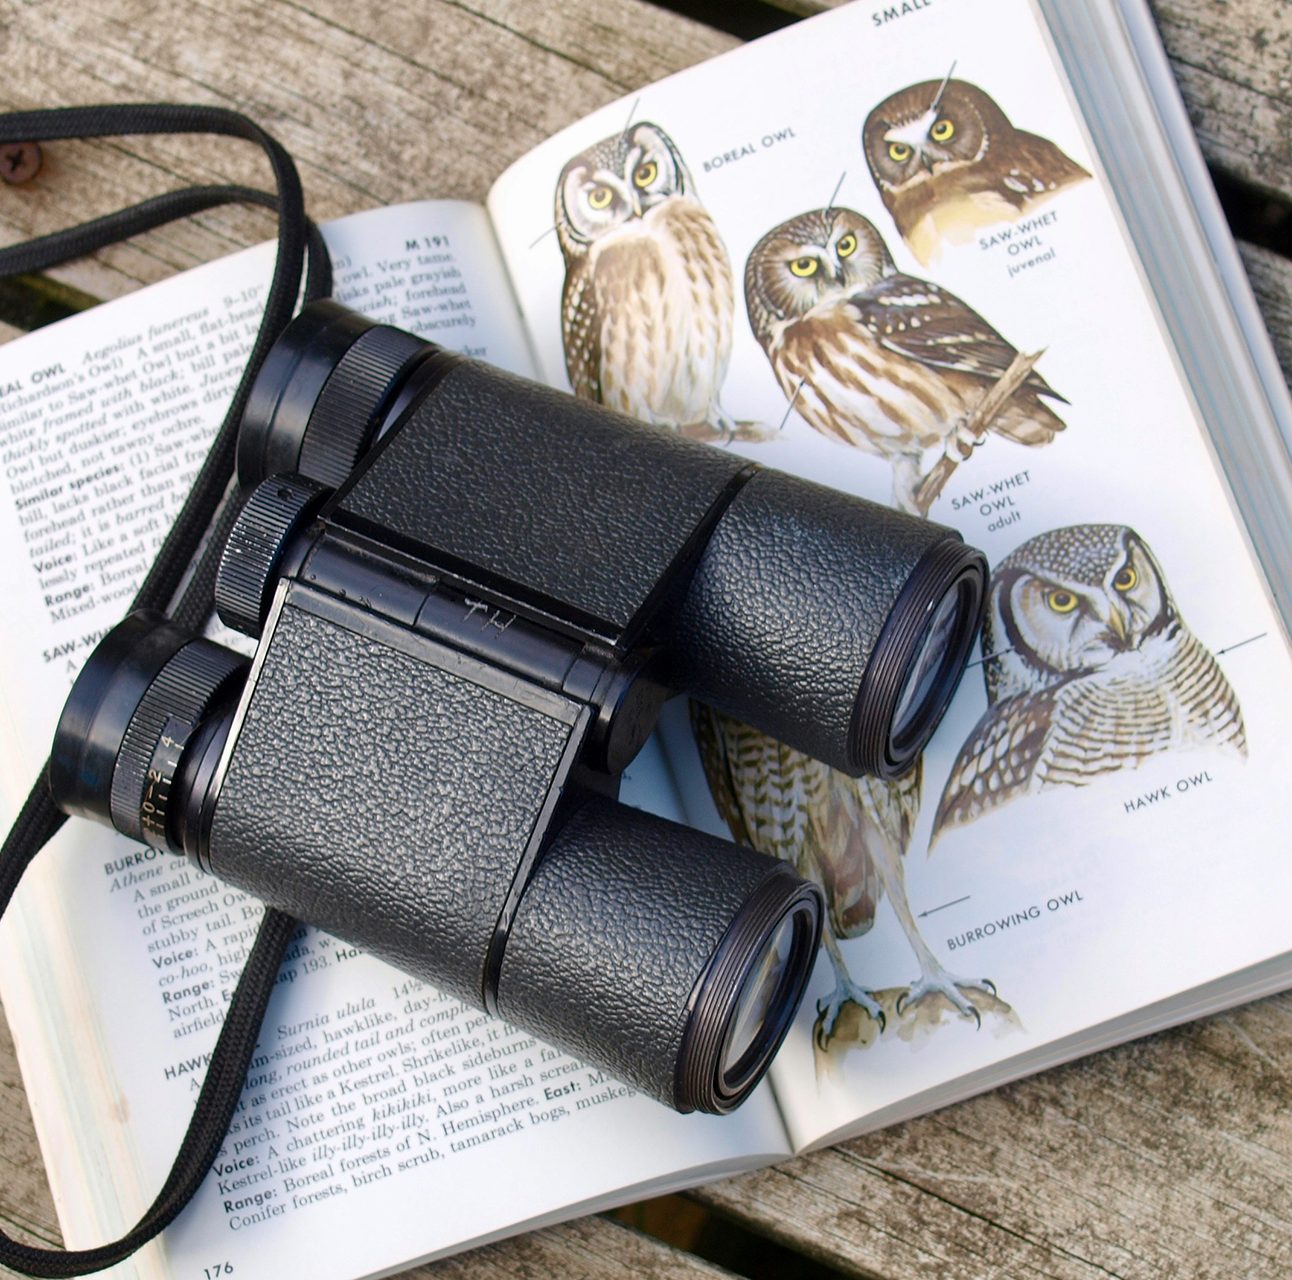 A black pair of binoculars on top of an open book with images of owls on the pages